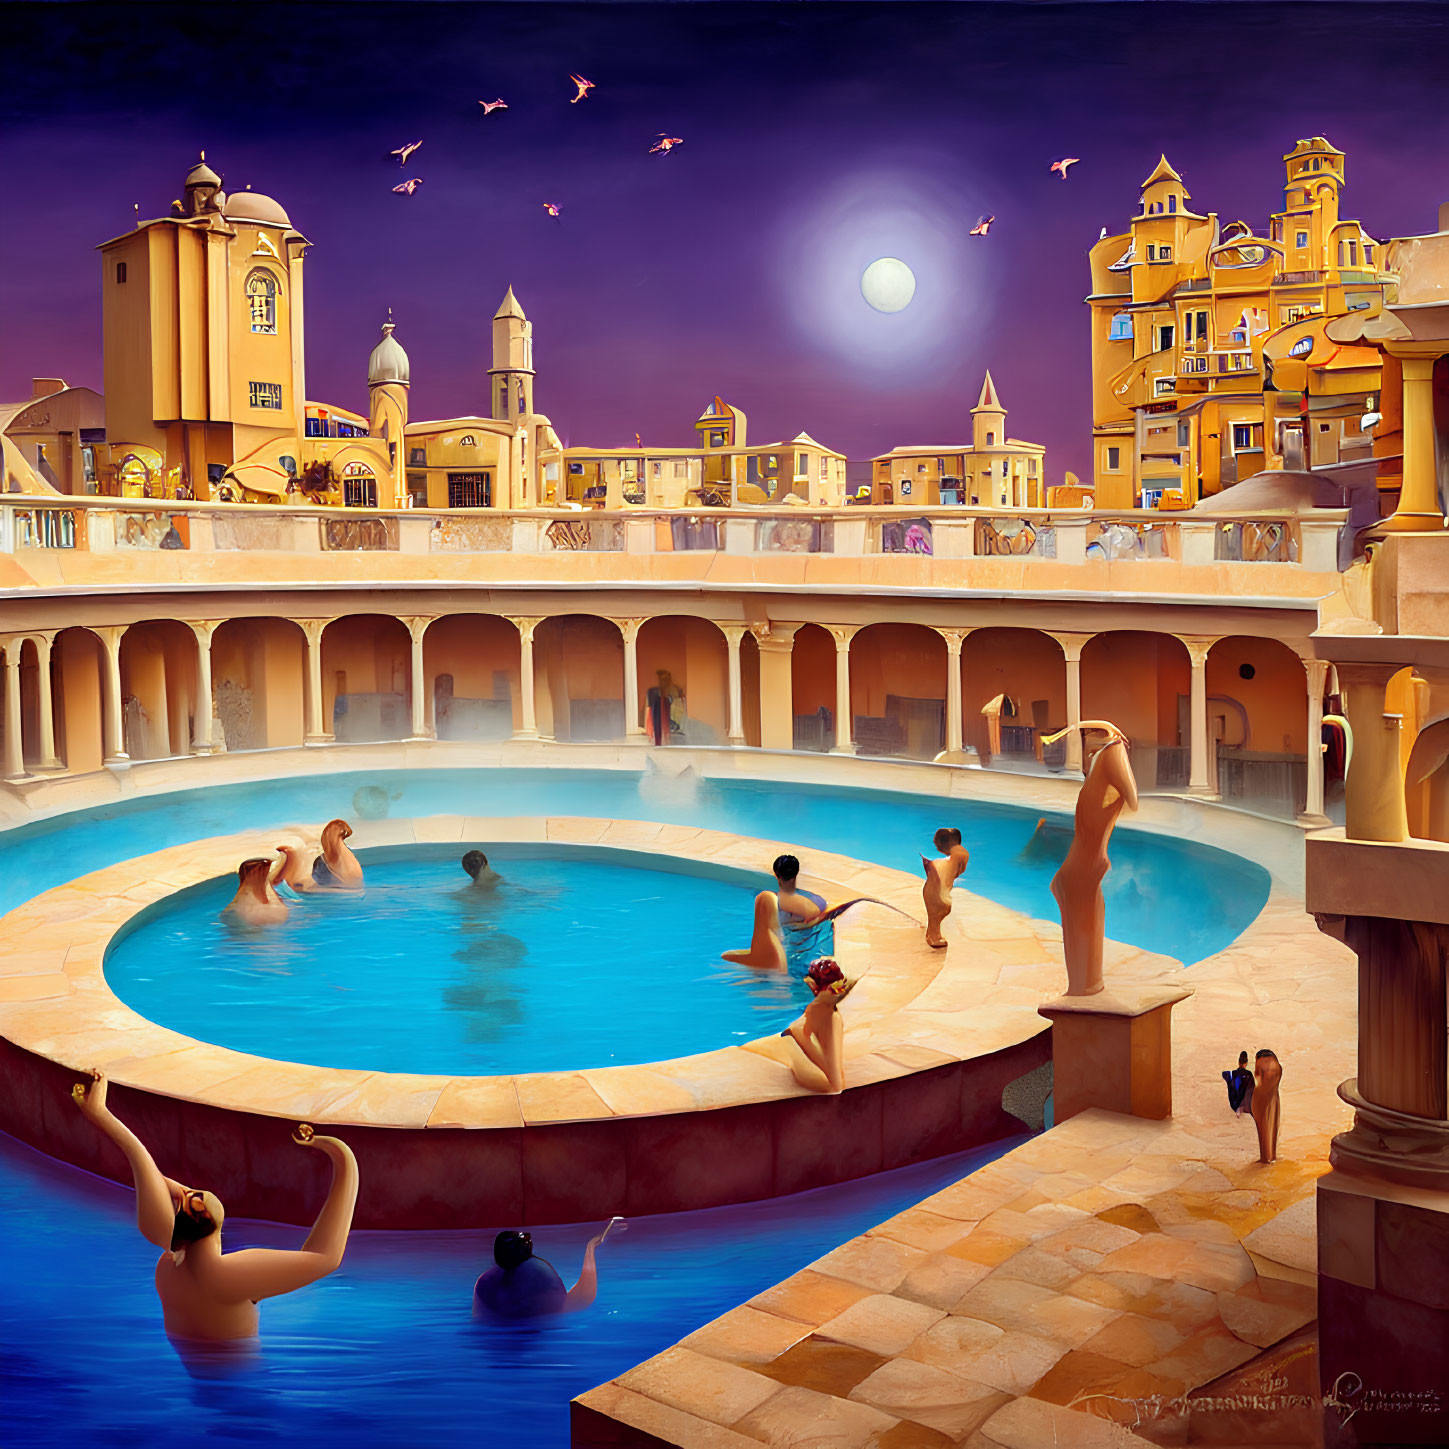 Colorful pool scene in charming town with terracotta buildings, birds, and moon